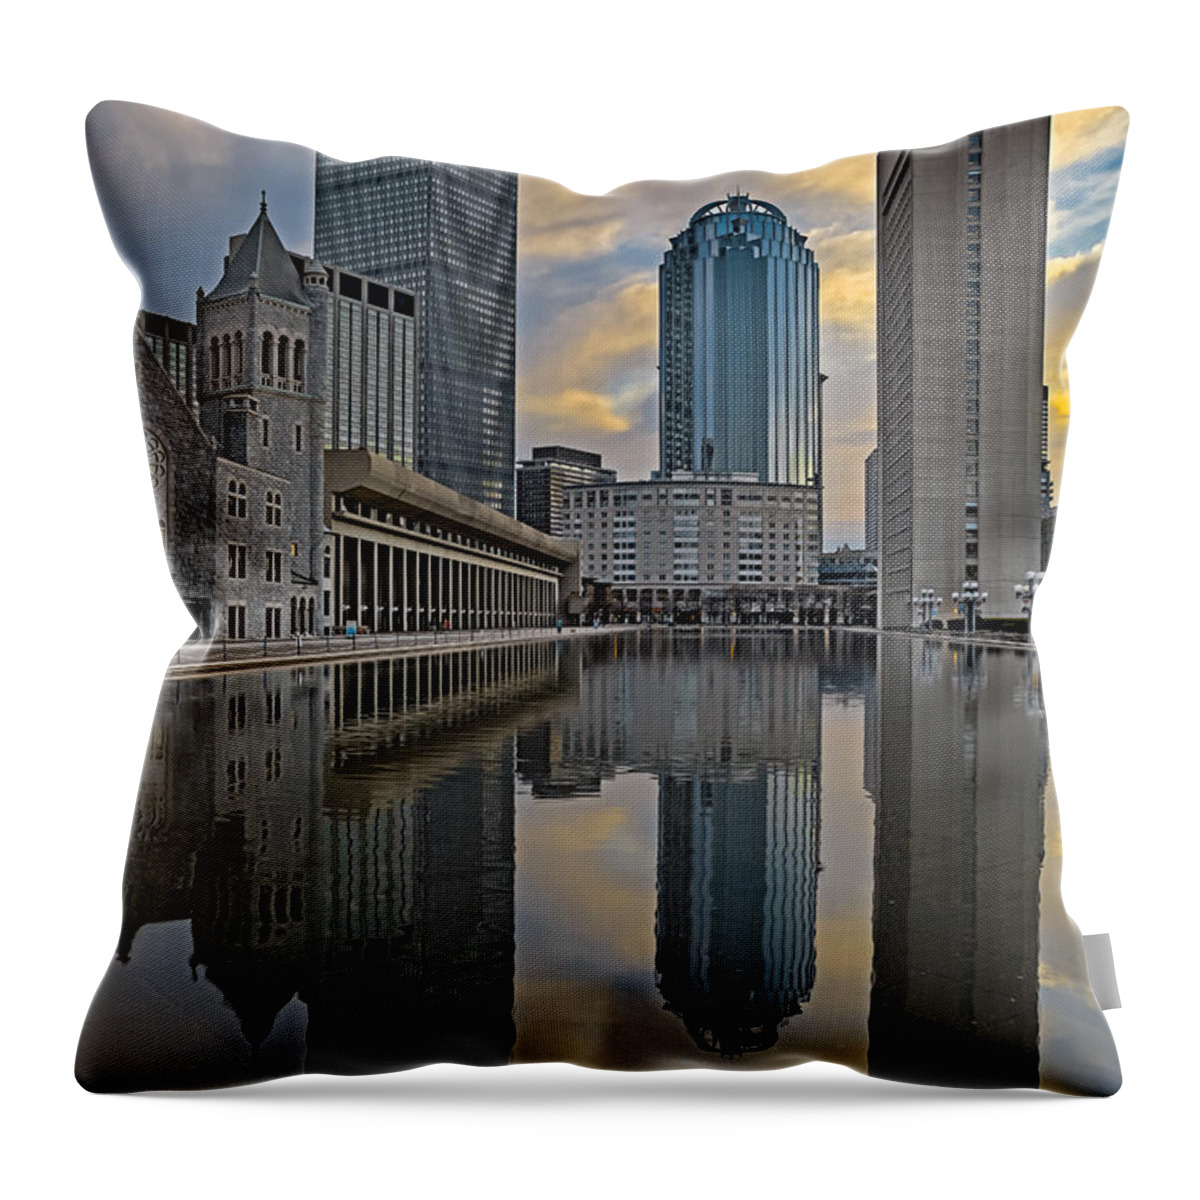 Boston Throw Pillow featuring the photograph Boston Reflections by Susan Candelario